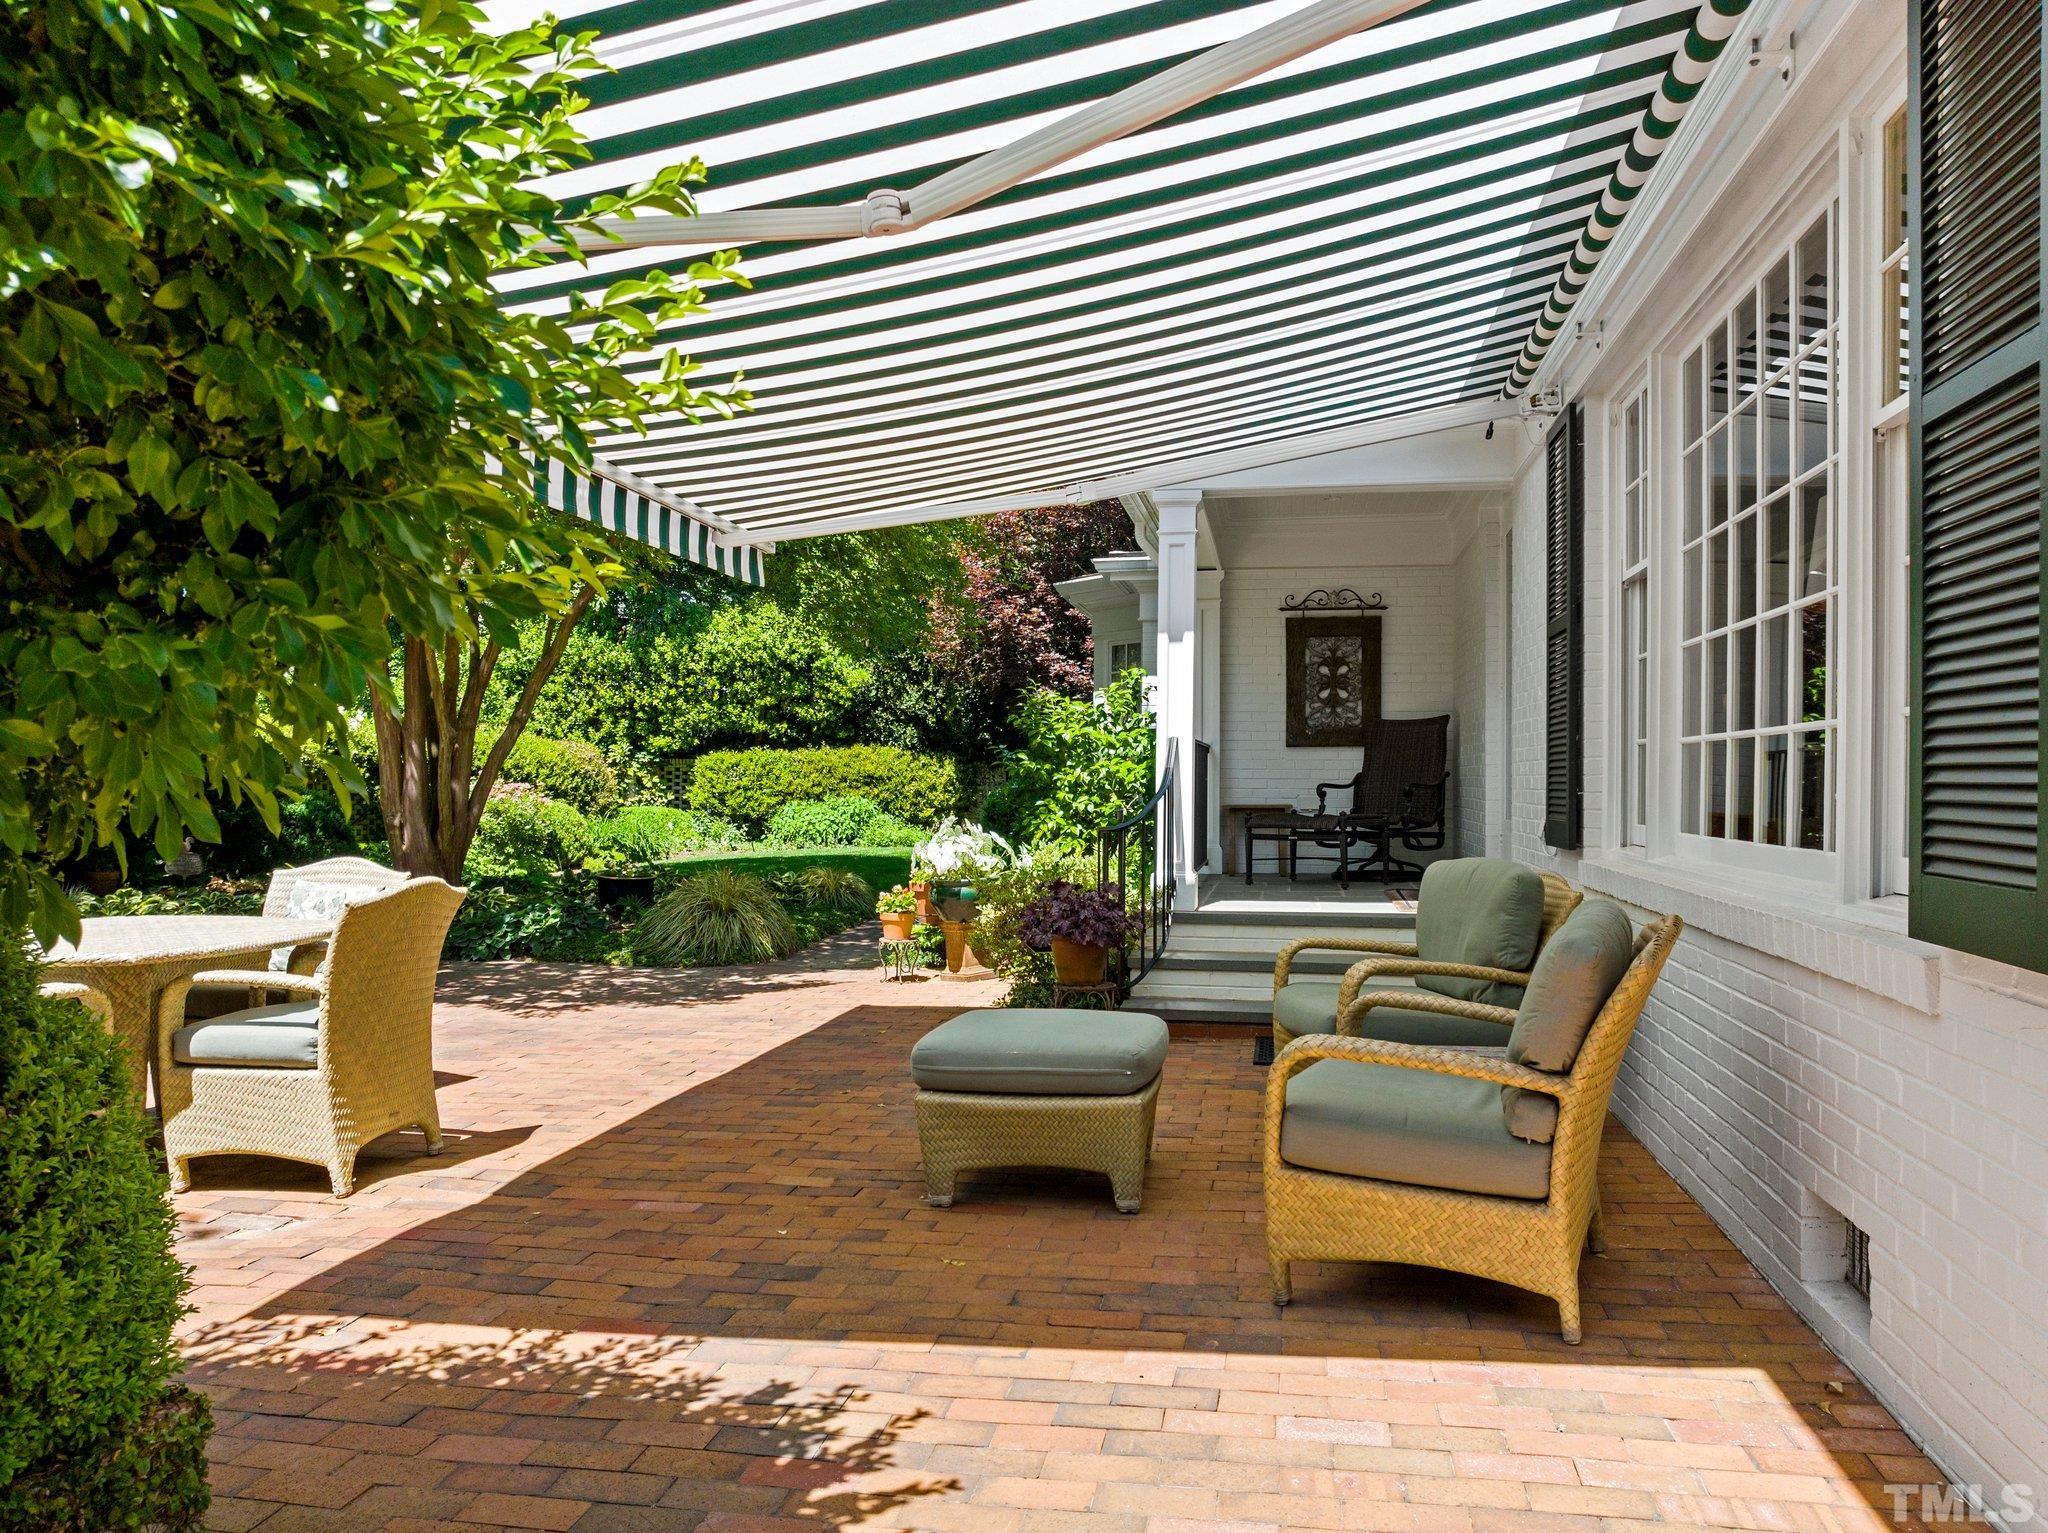 Remote control awning allows for as much or little shade as desired